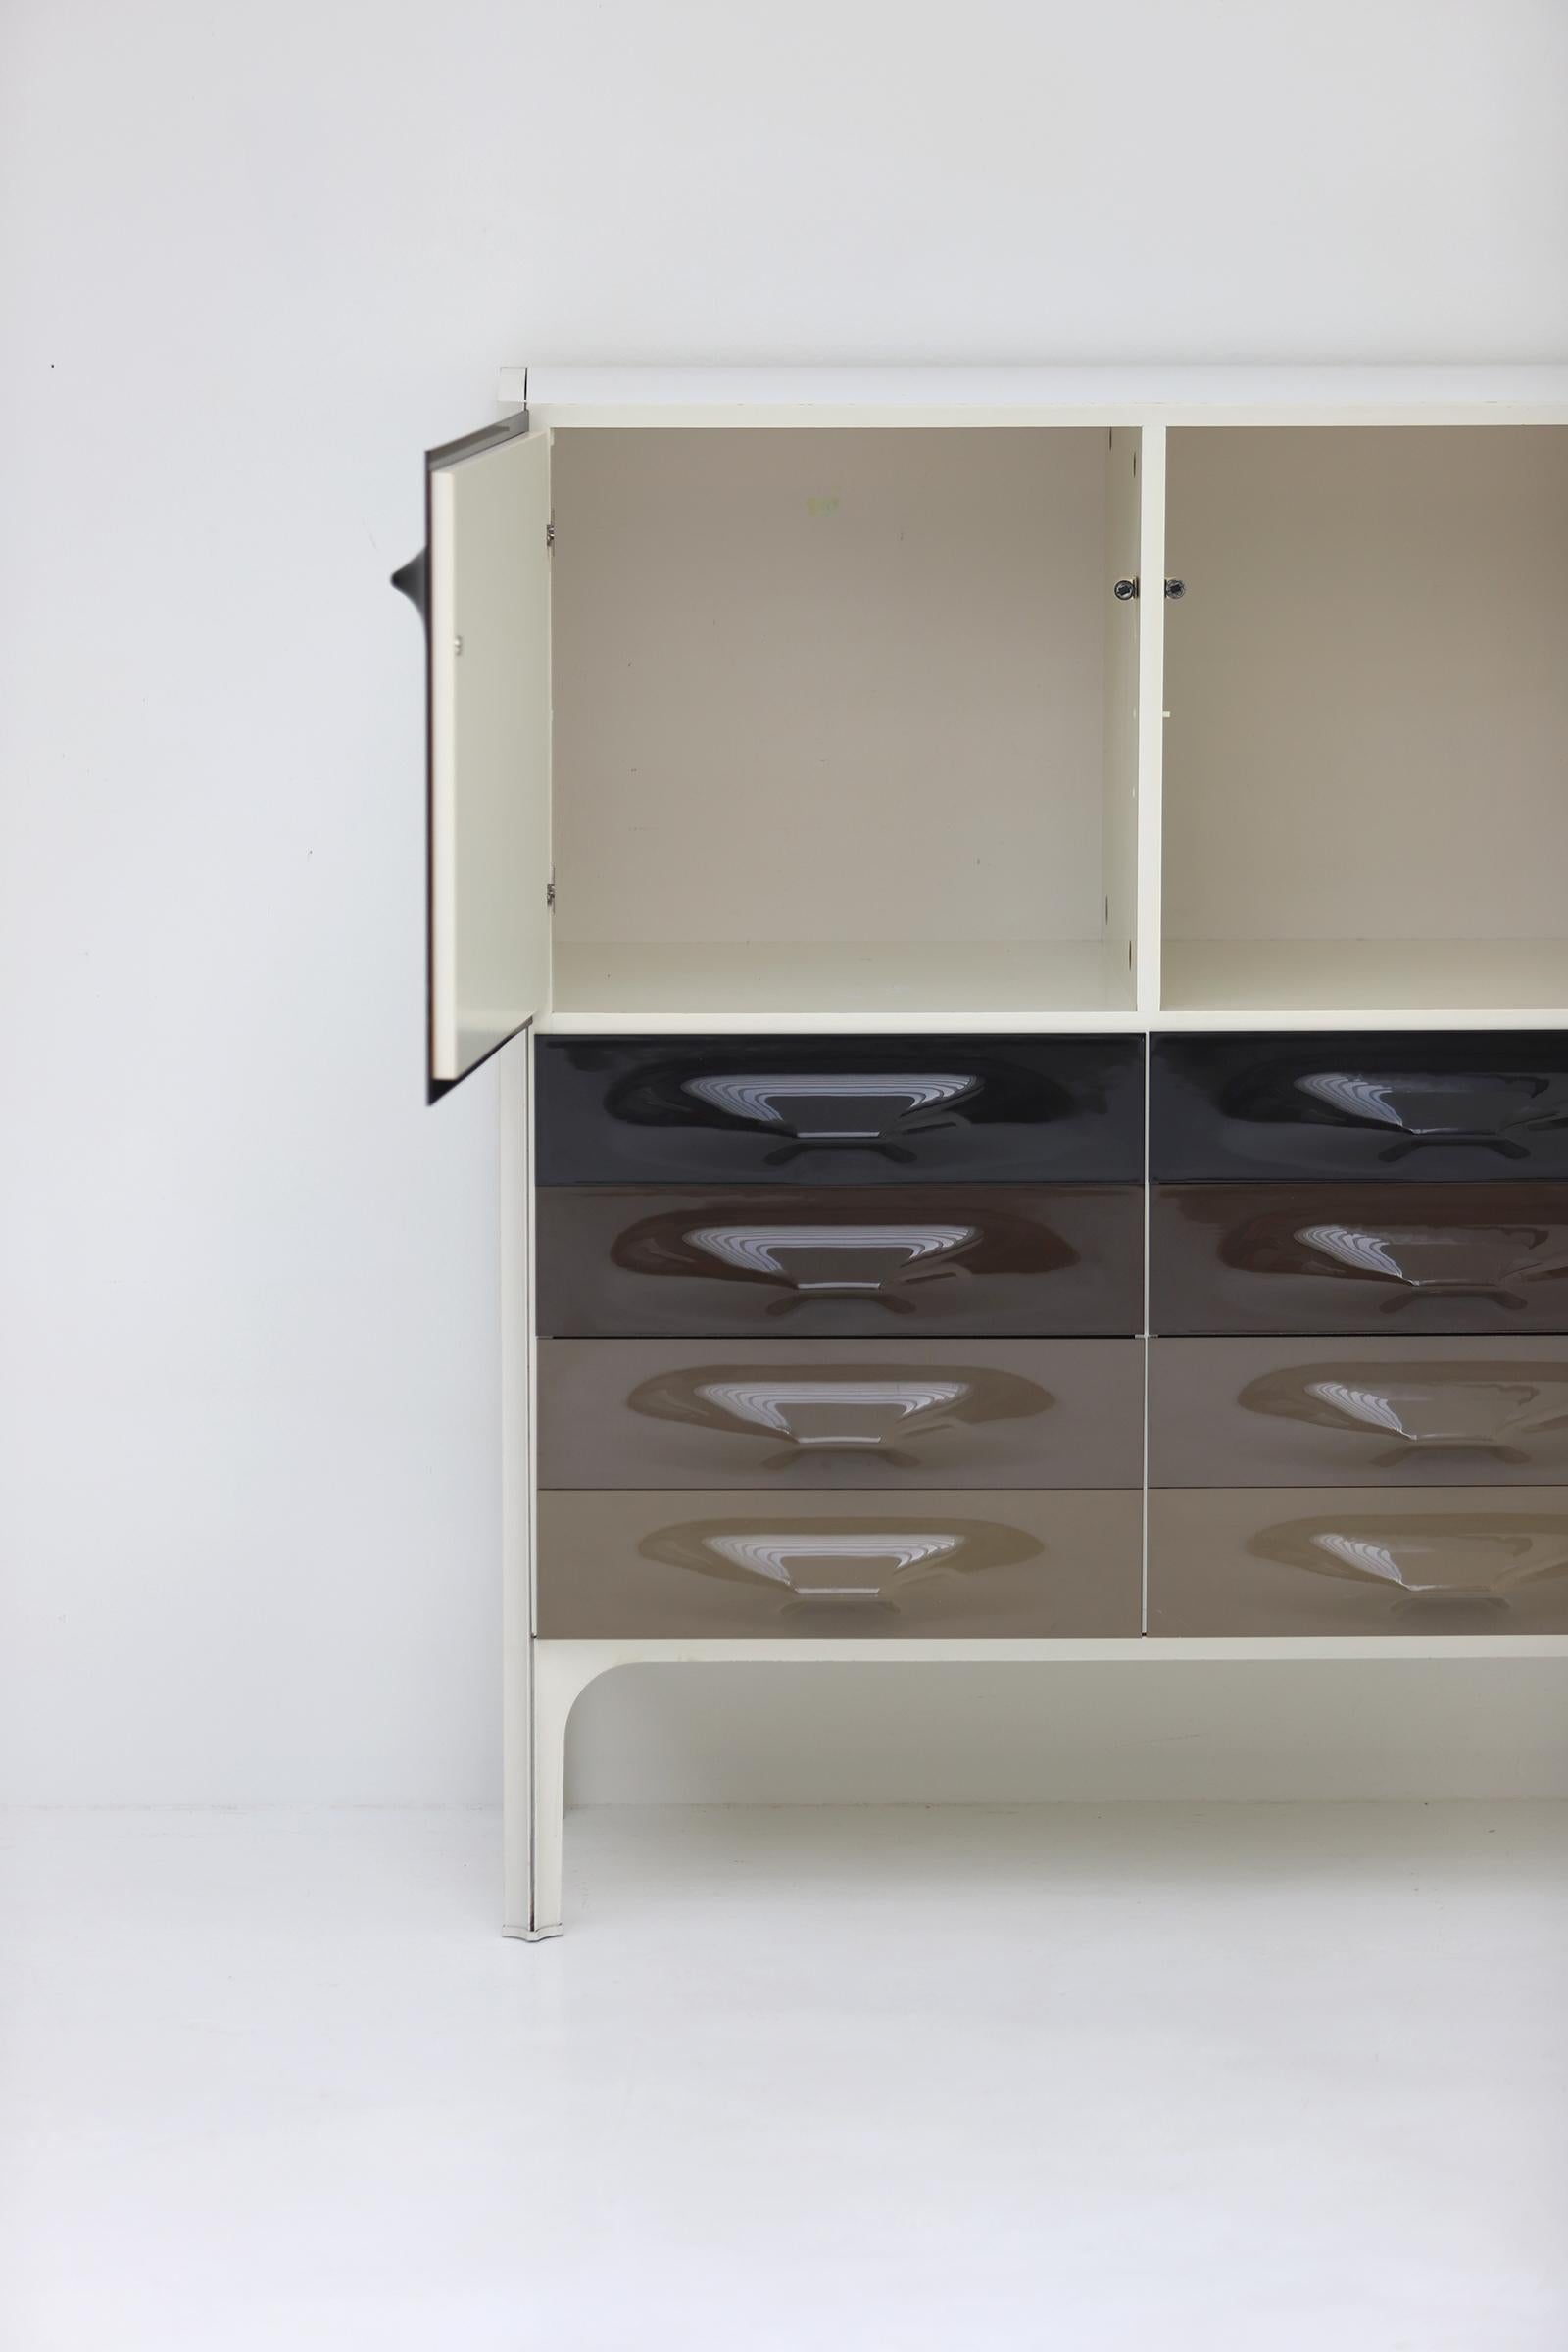 Mid-20th Century Modern space age DF2000 cabinet by Raymond Loewy for Doubinsky Frères in 1968.